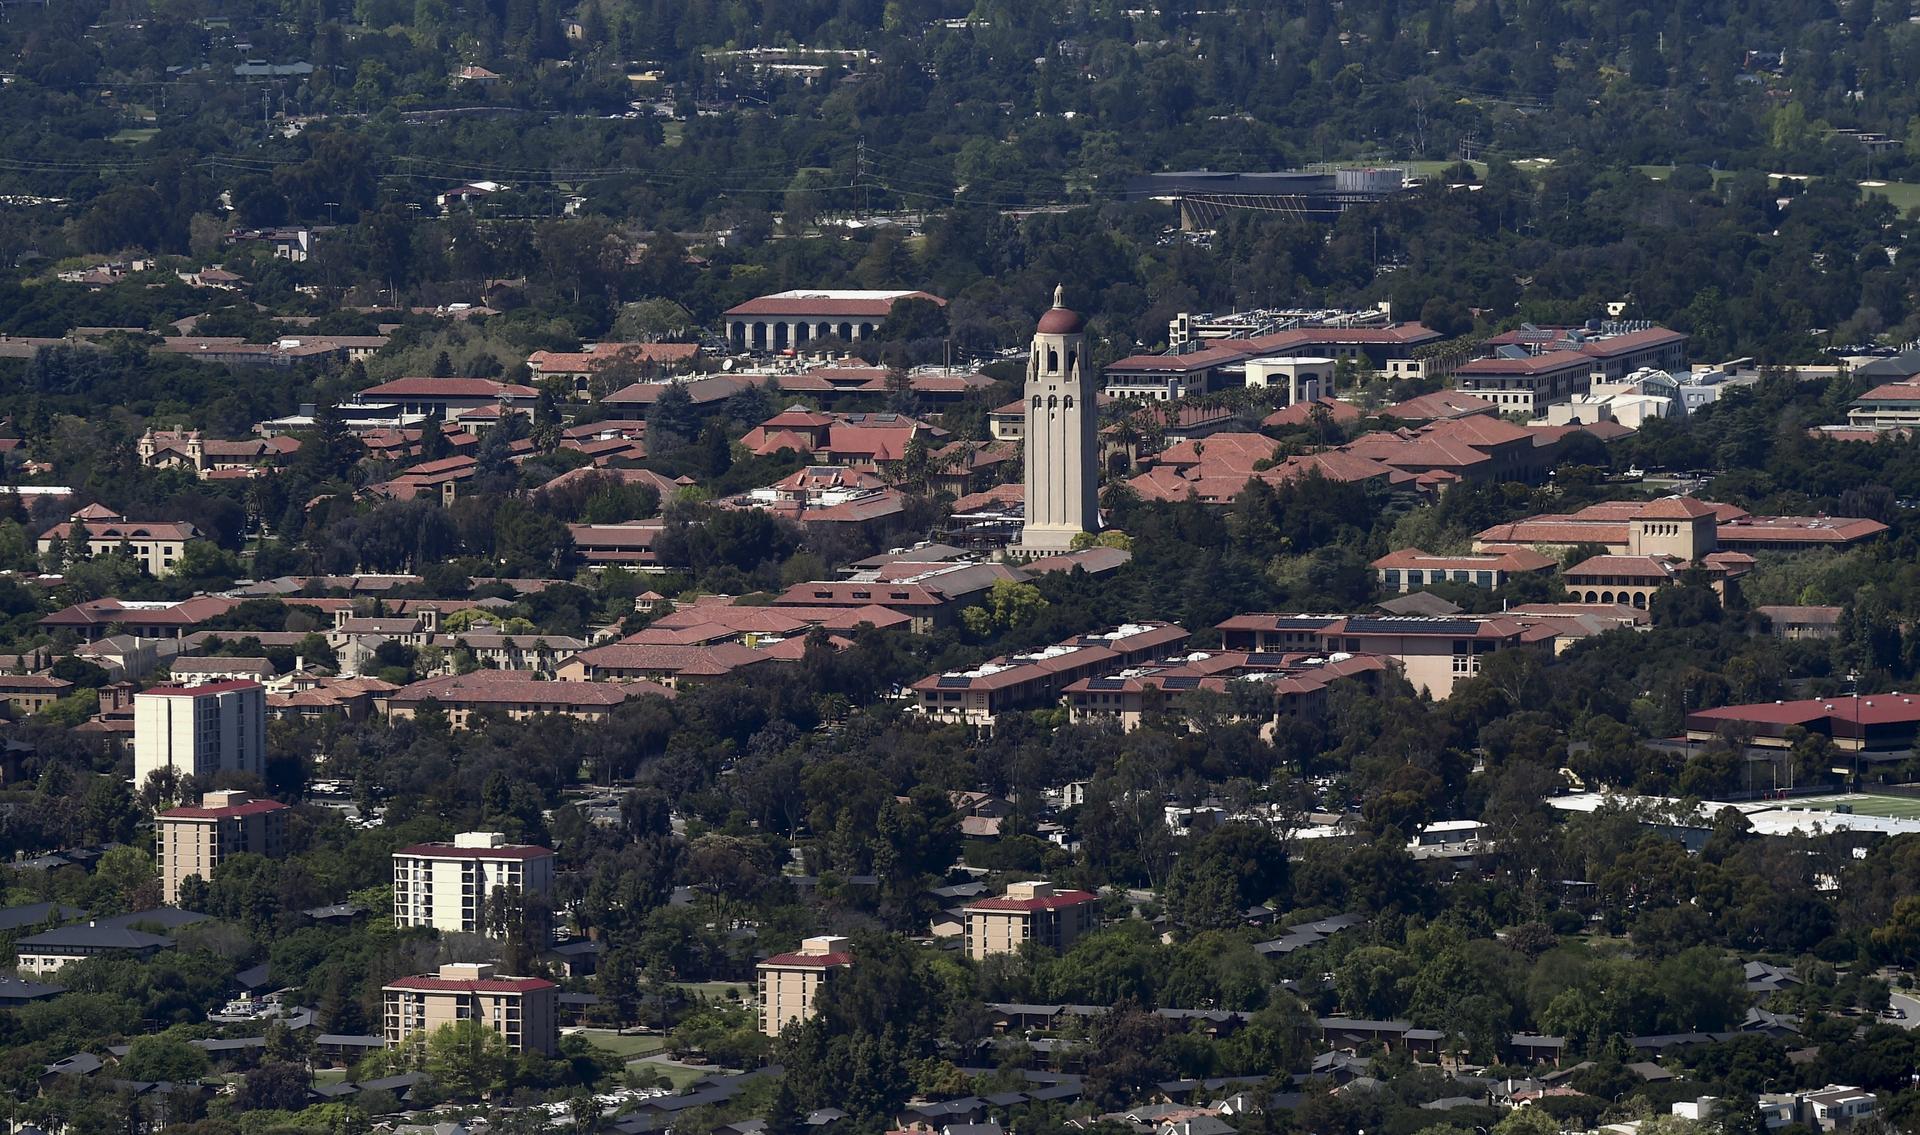 Stanford University's campus is seen in an aerial photo in Stanford, California, United States on April 6, 2016.